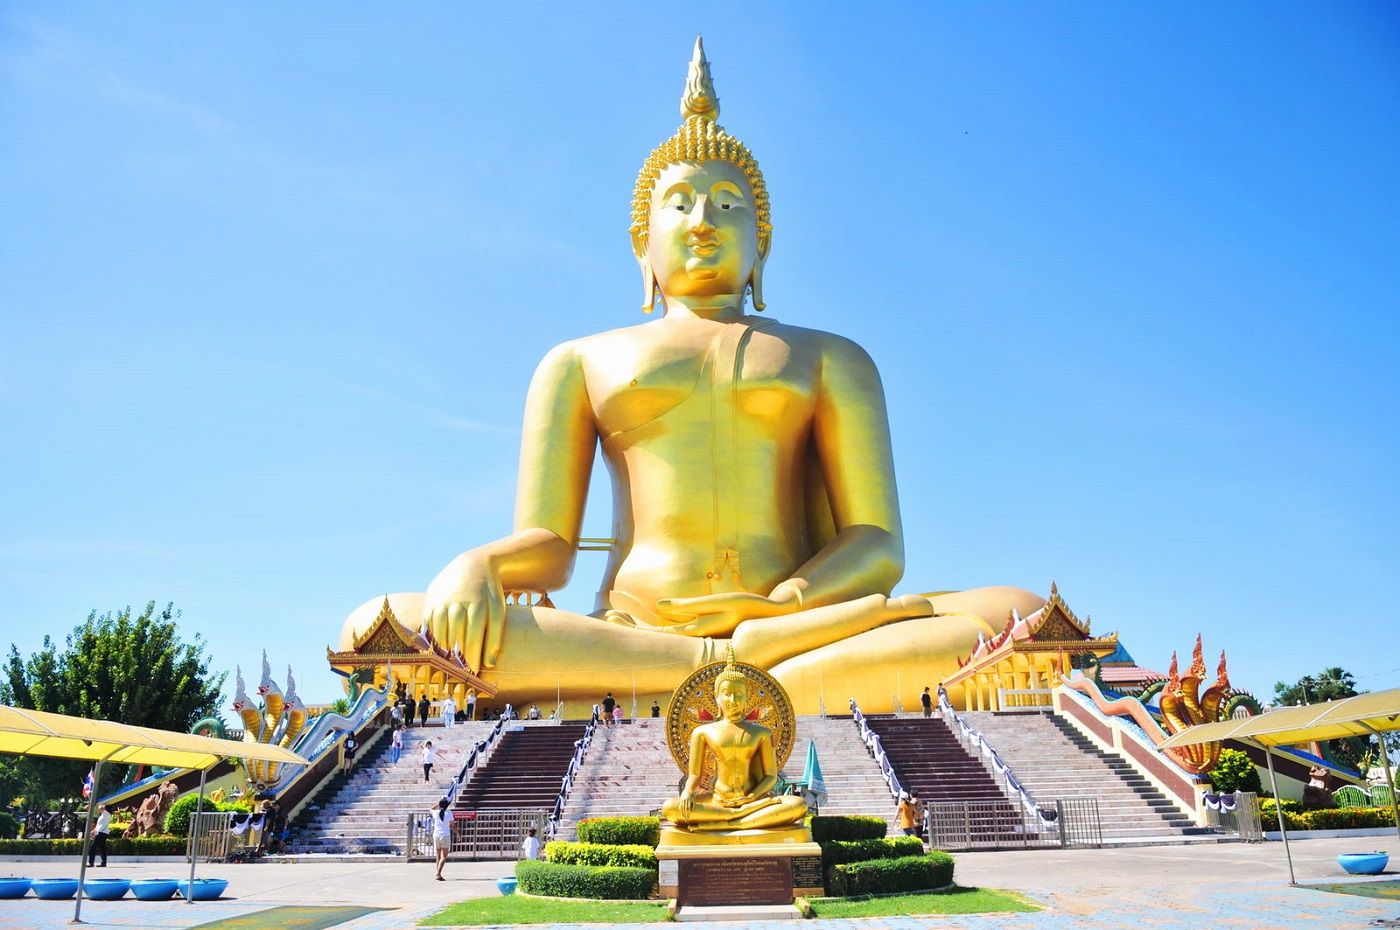 Statue of Great Buddha of Thailand